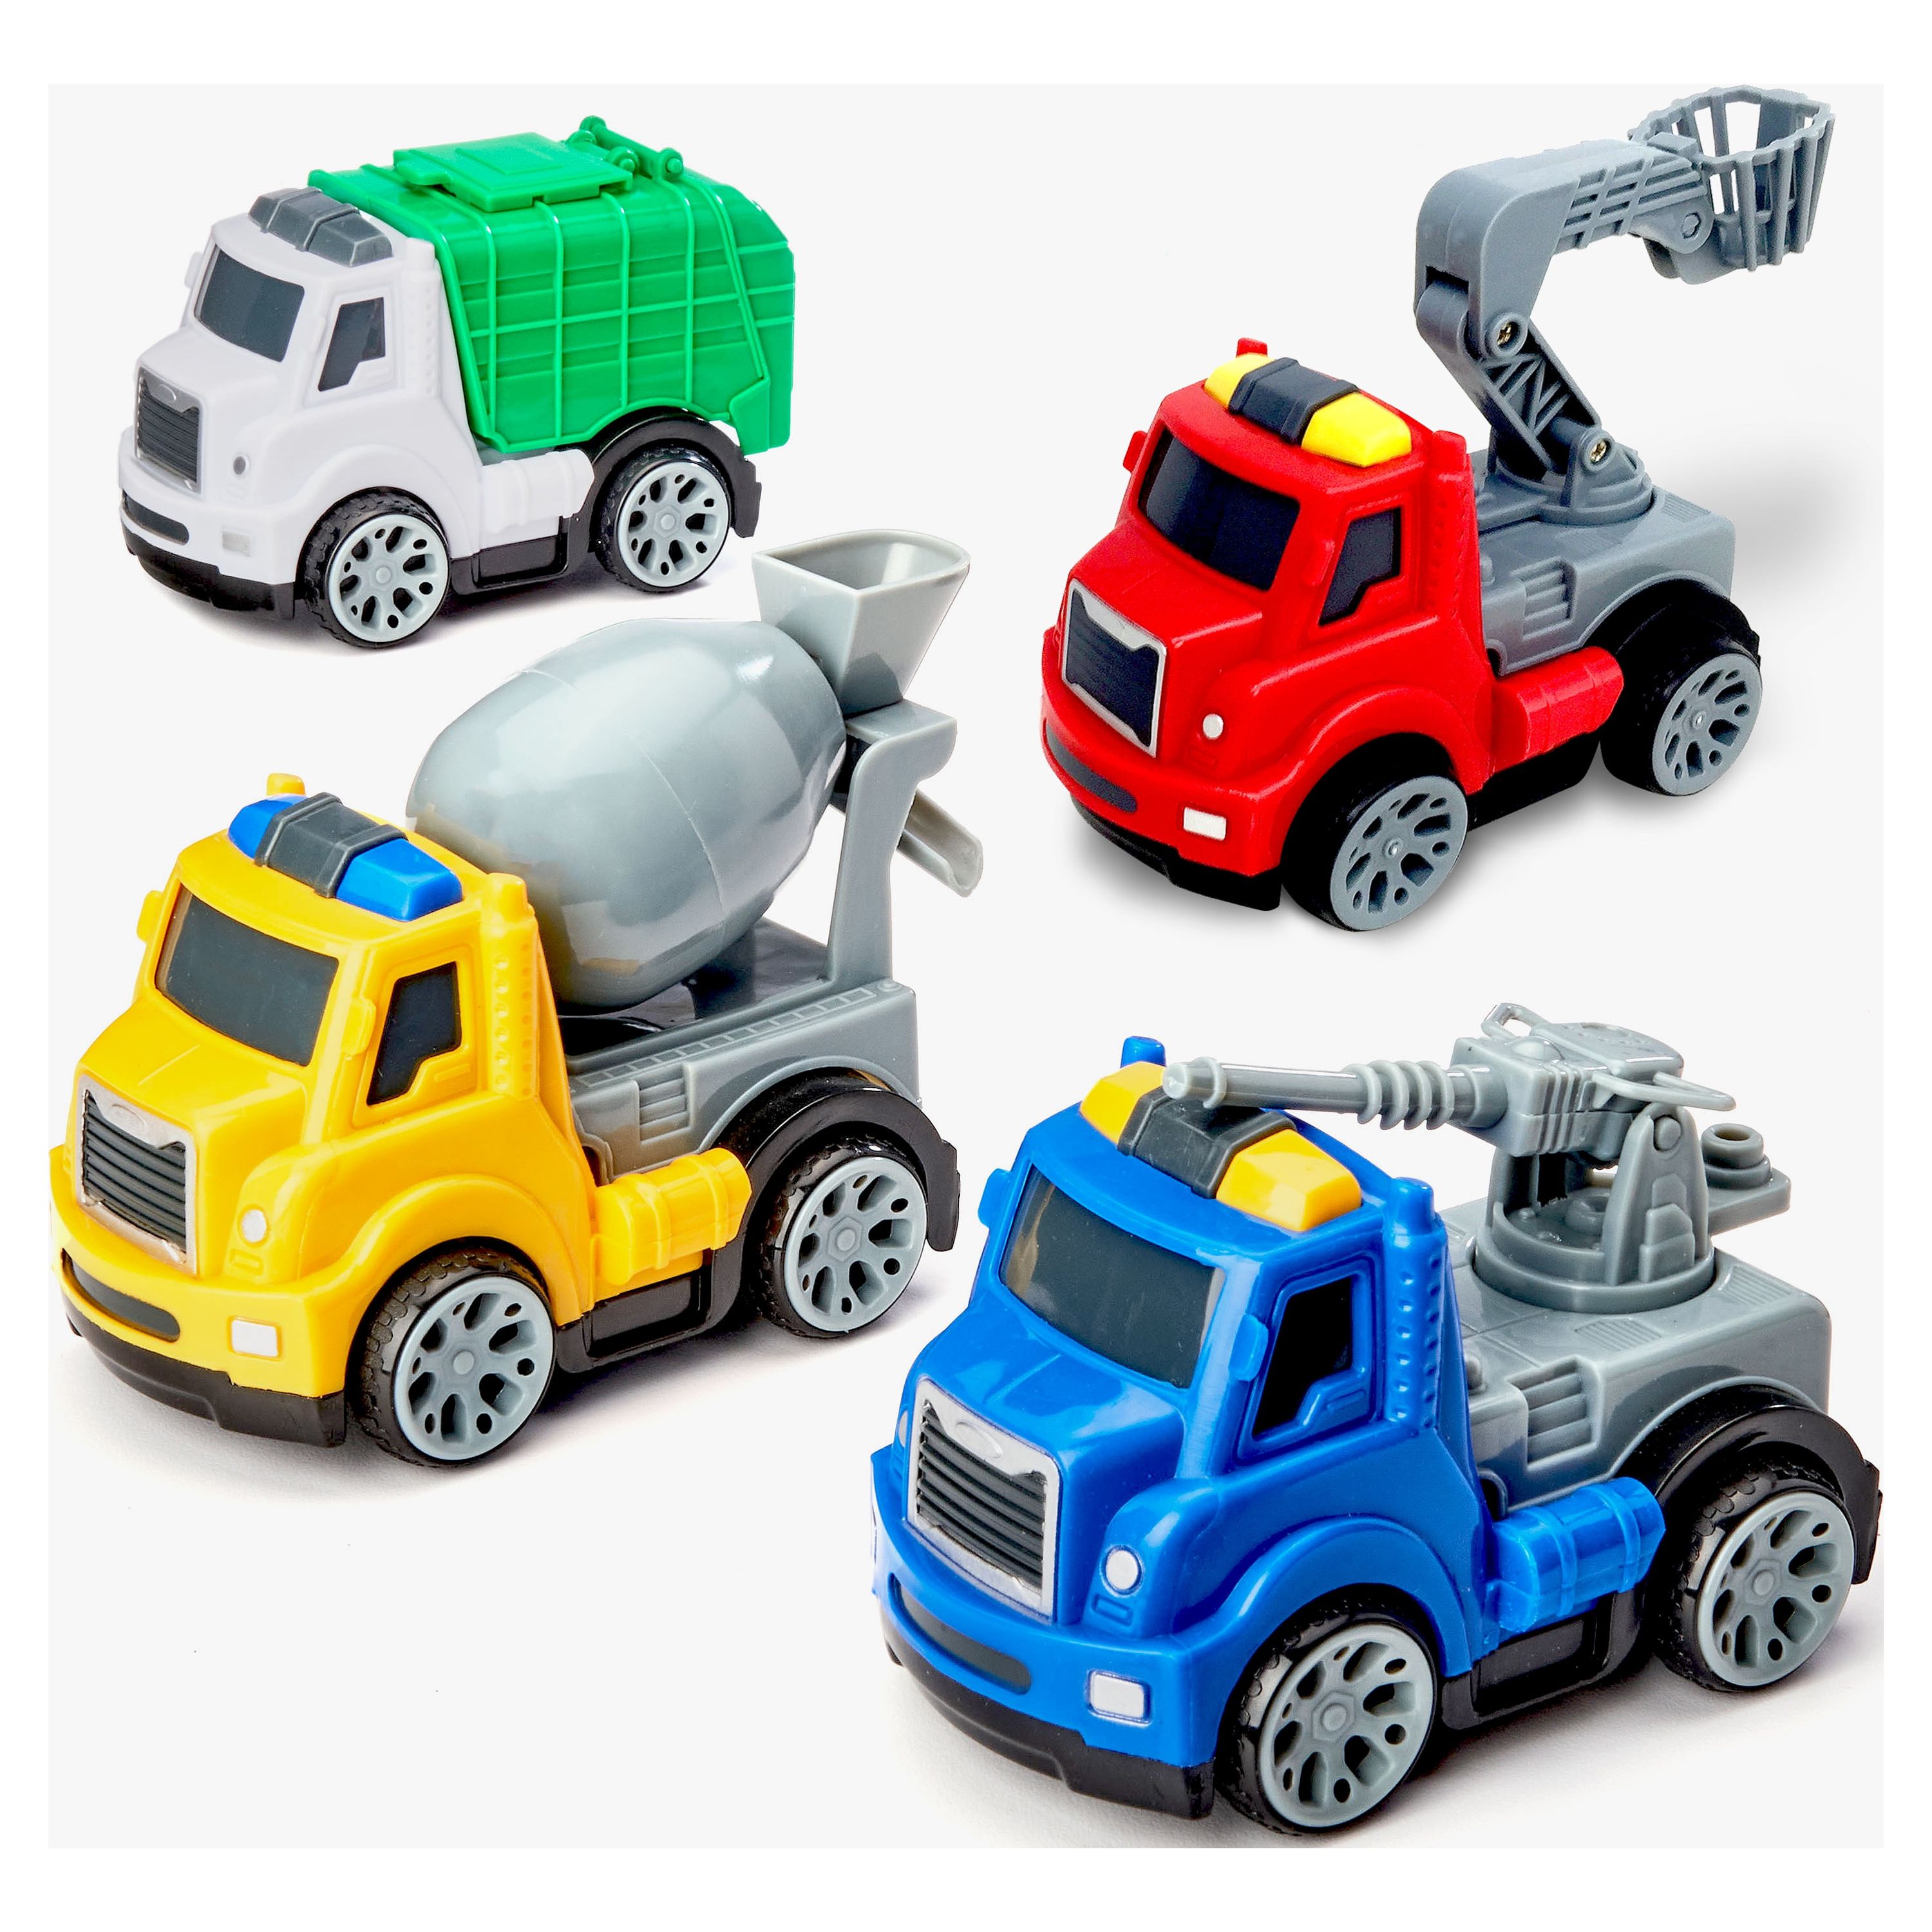 Kid Connection Friction Powered Utility Trucks Play Set, 4 Pieces - image 2 of 6